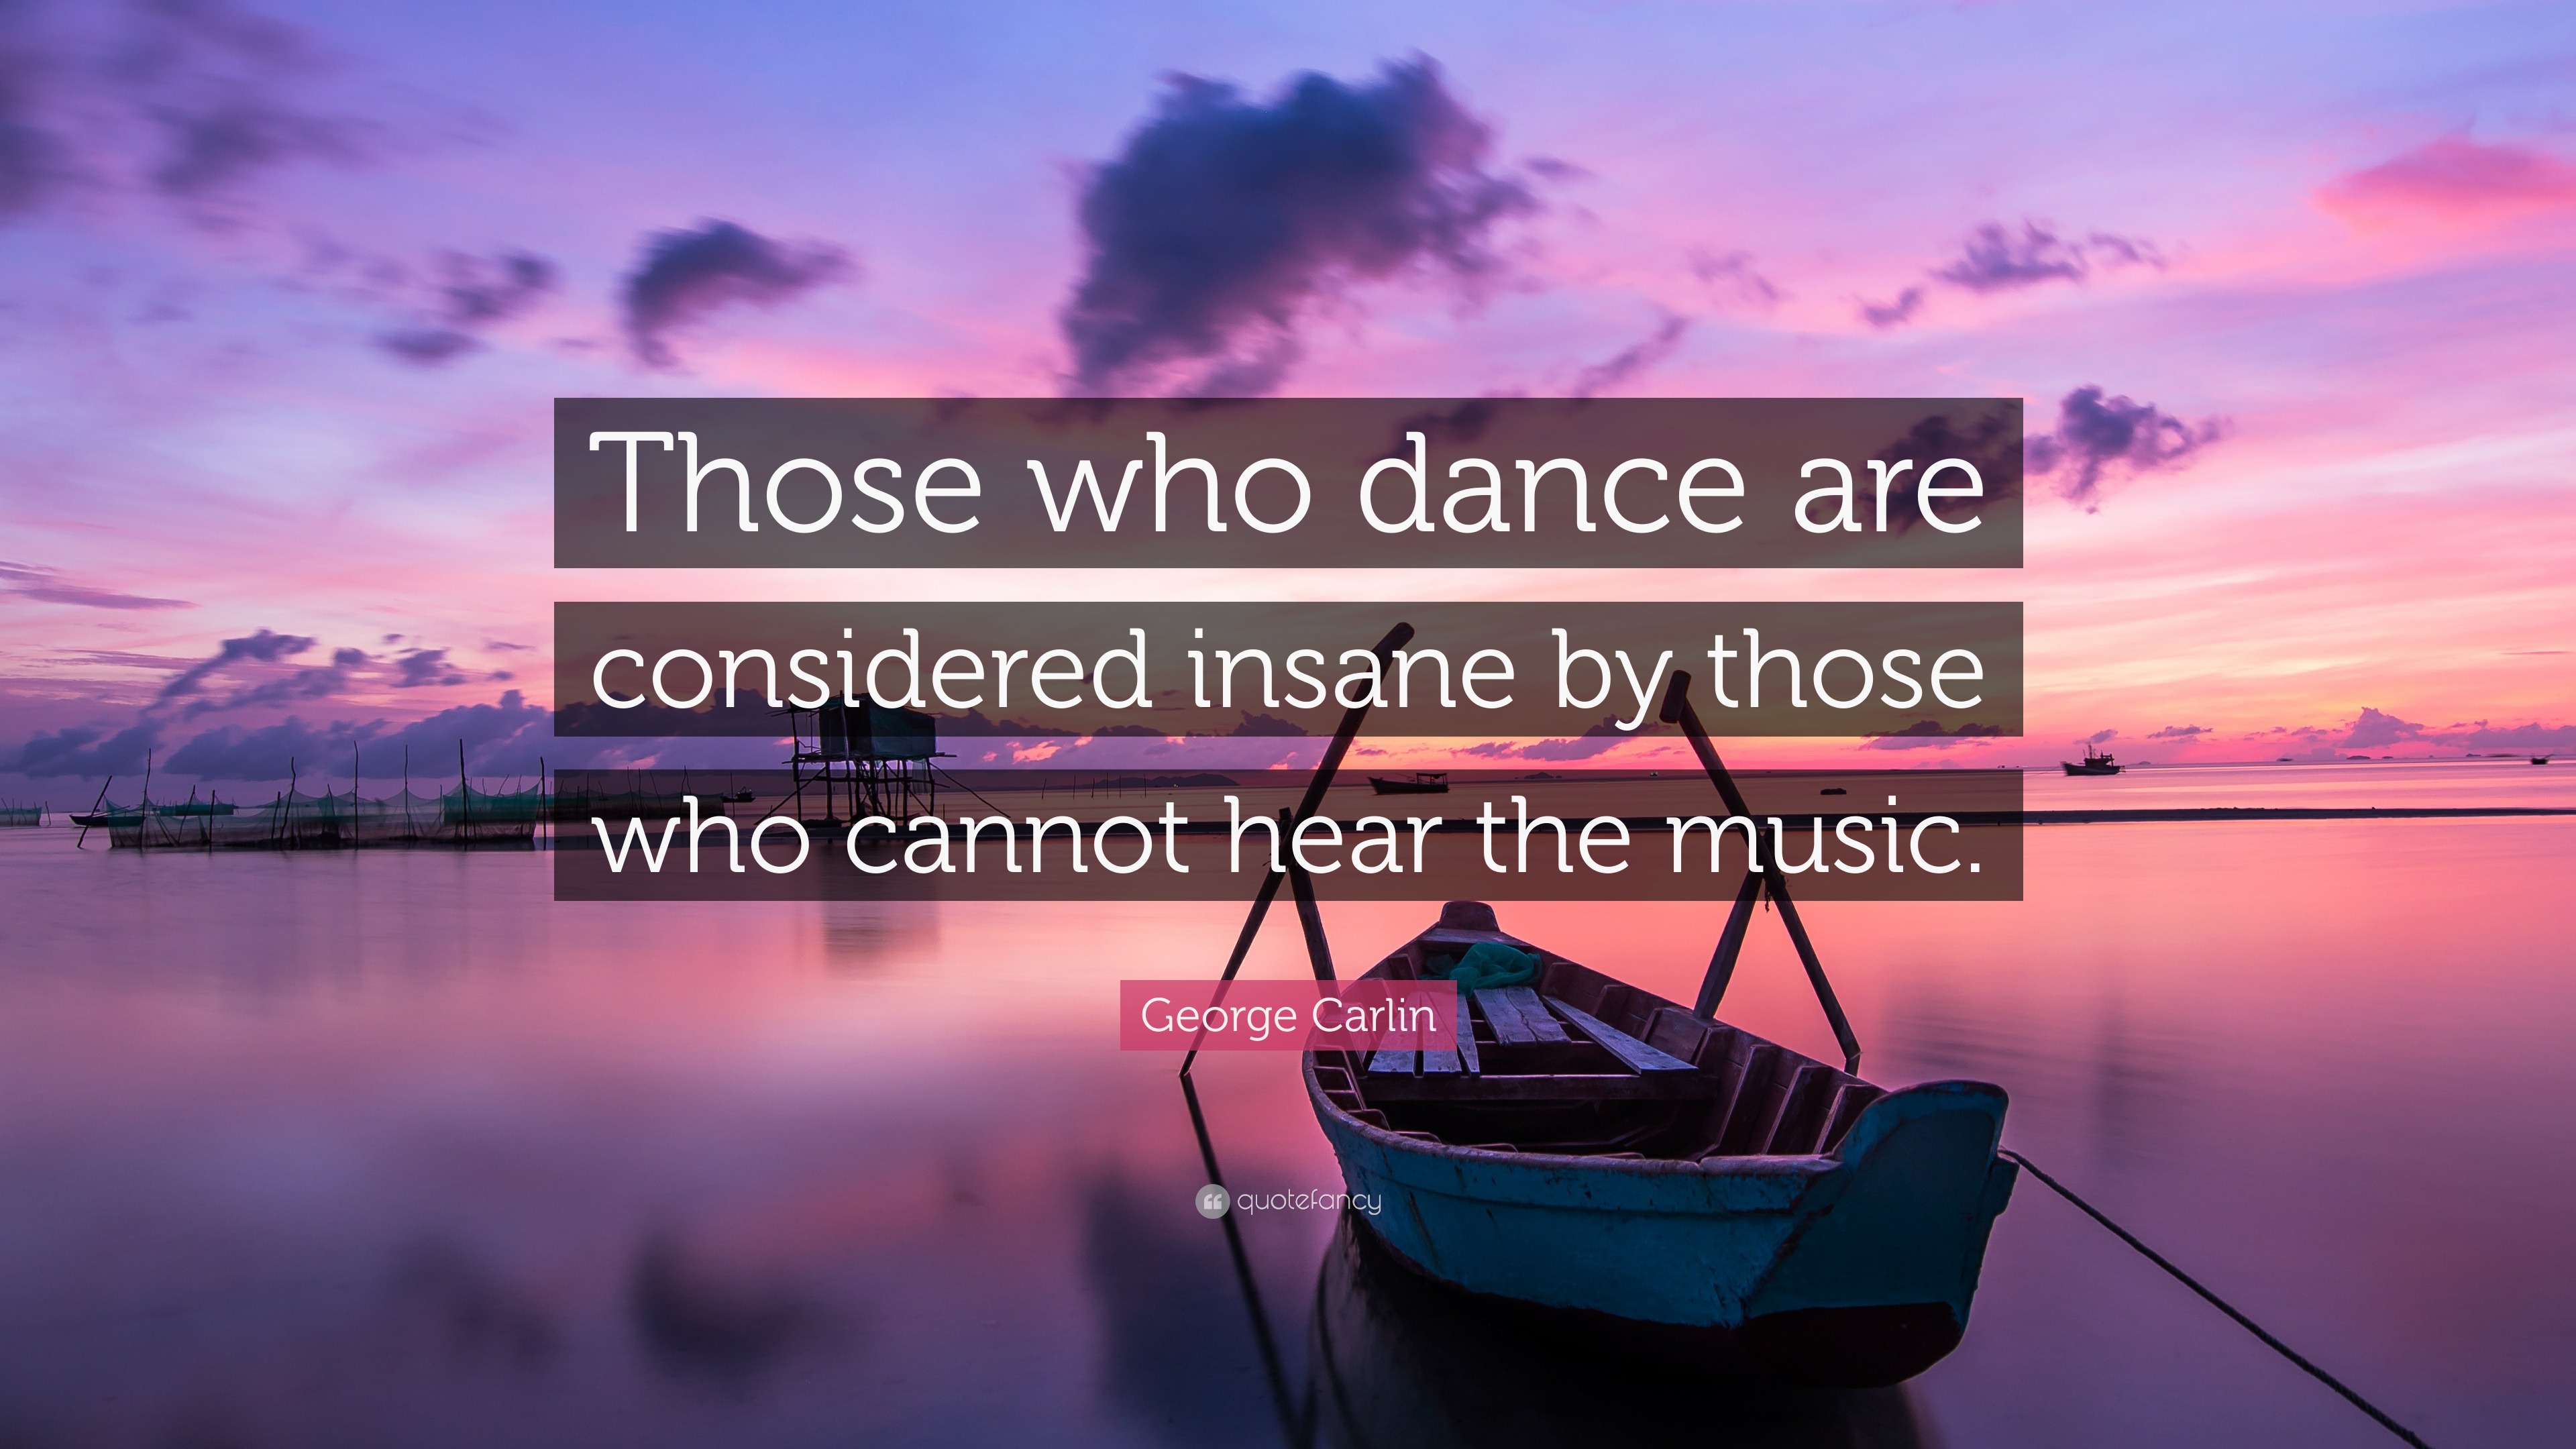 George Carlin Quote: “Those who dance are considered insane by those